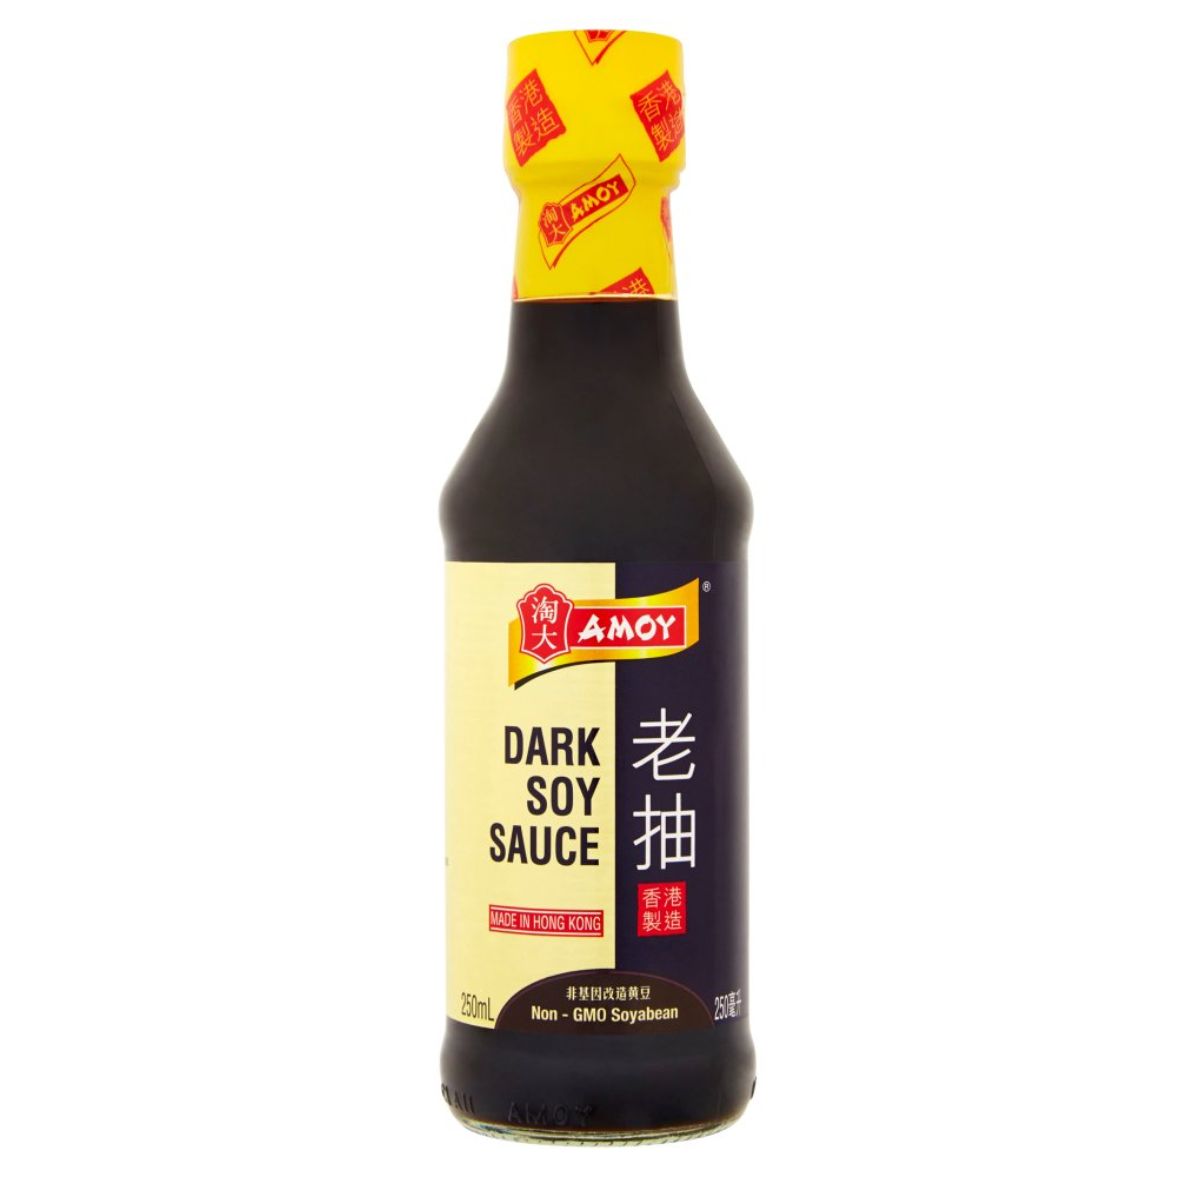 A bottle of Amoy - Dark Soy Sauce - 250ml on a white background.